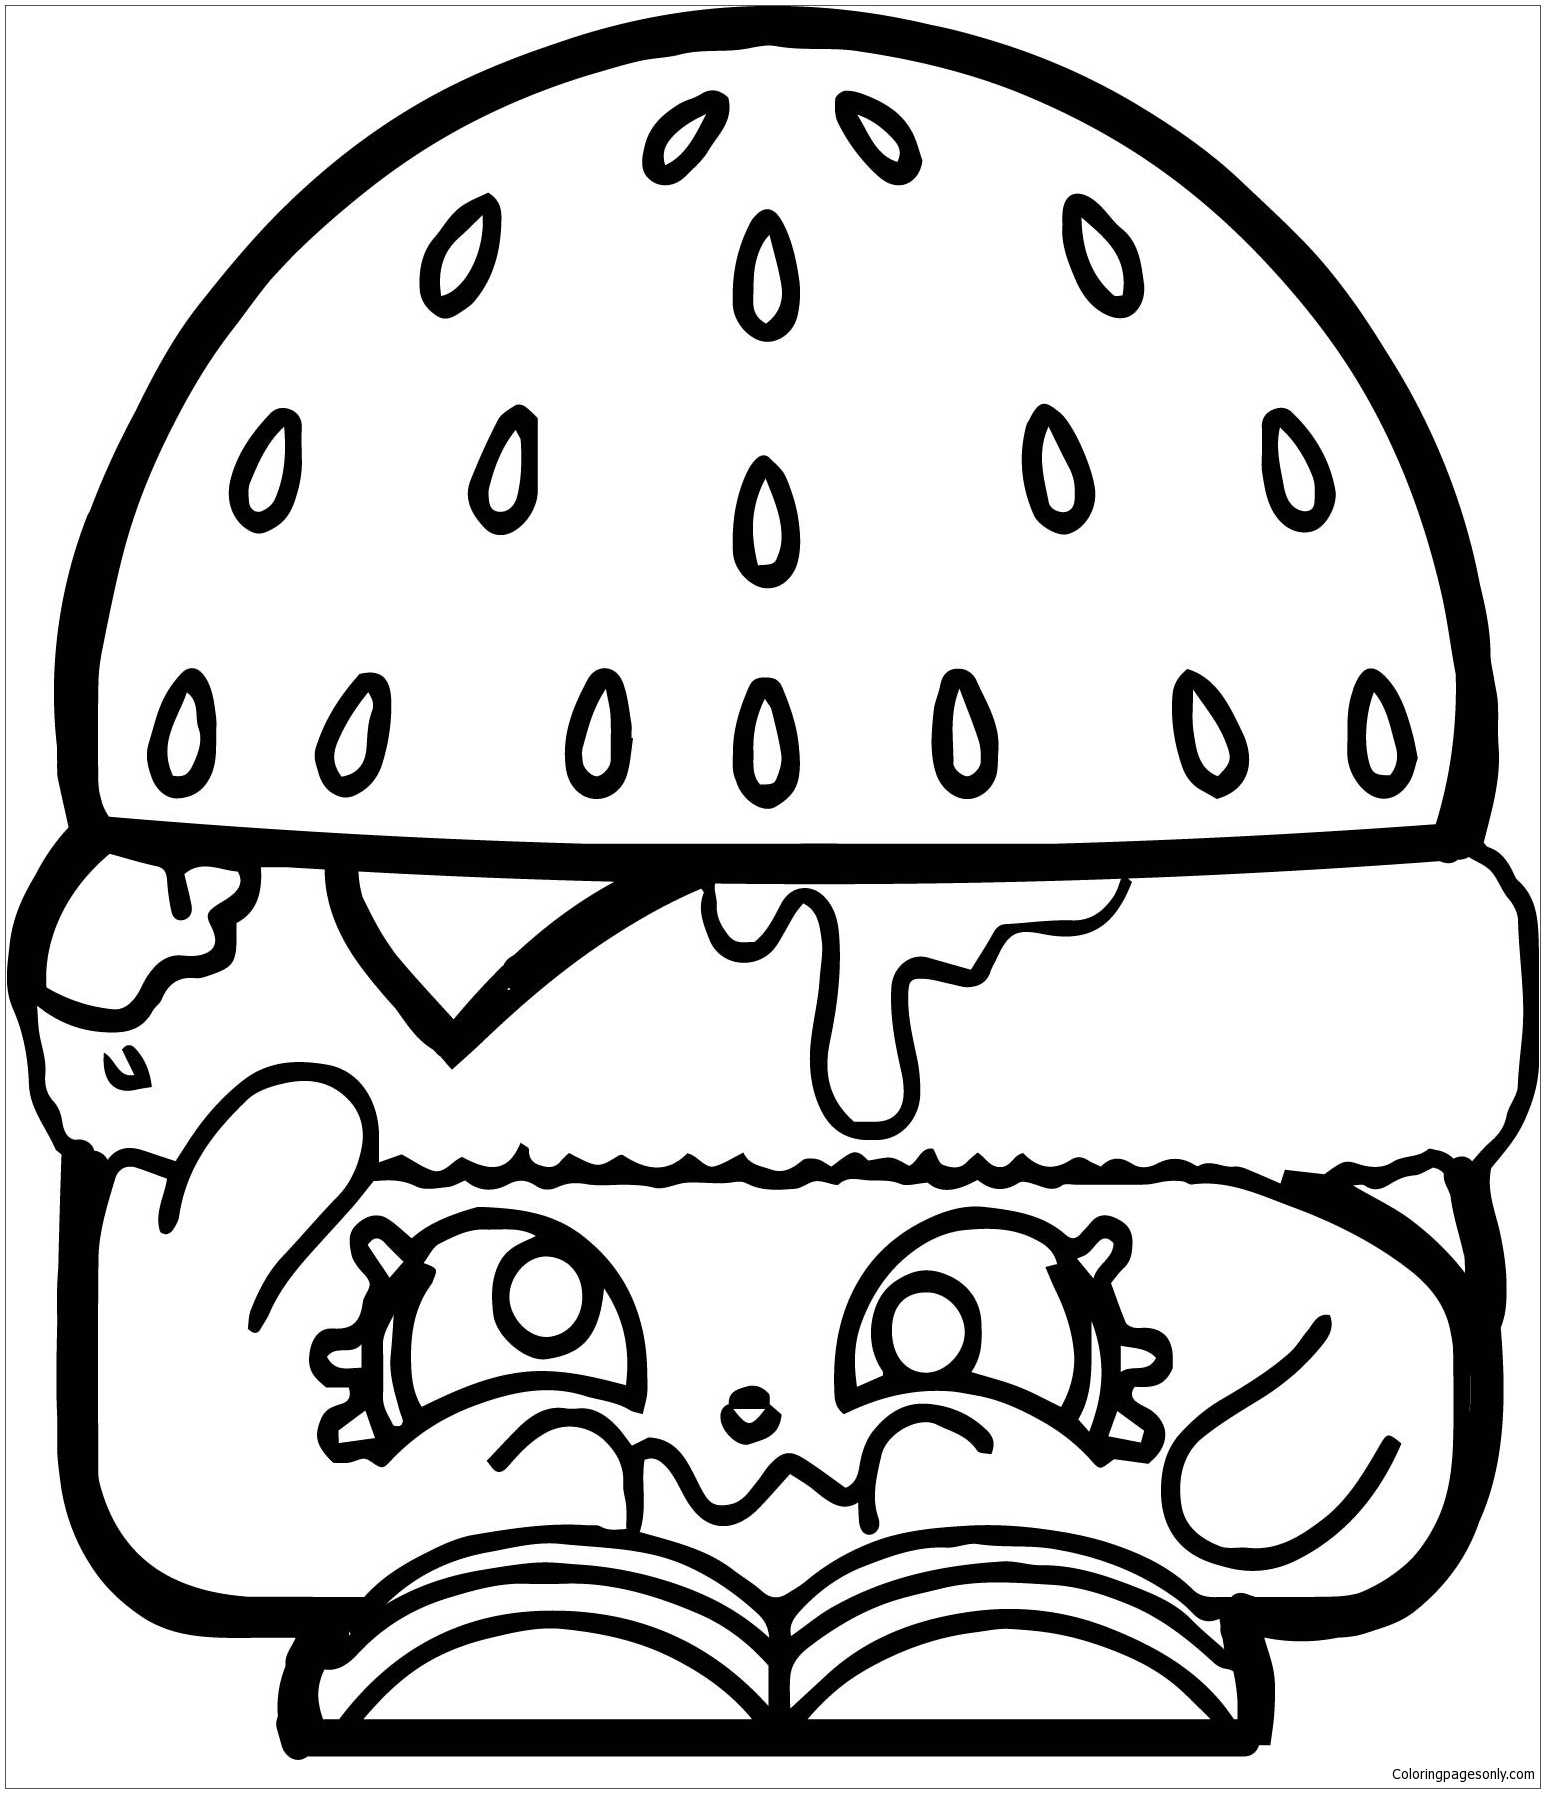 Hamburger Of Shopkins Coloring Page - Free Coloring Pages Online